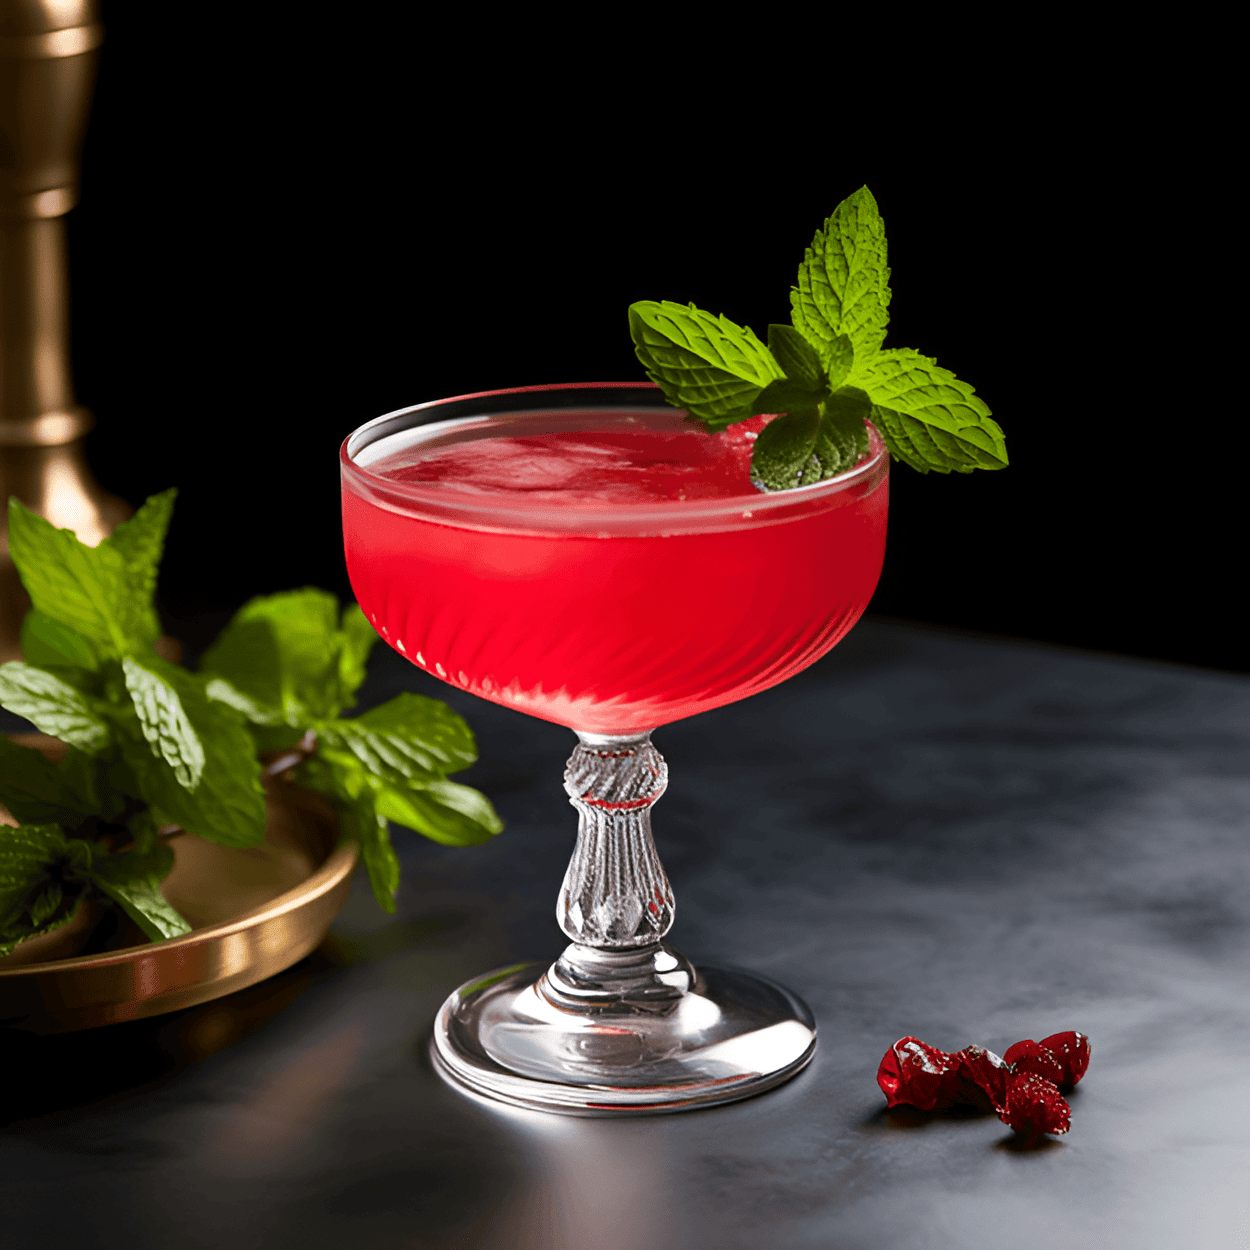 Robitussin Cocktail Recipe - The Robitussin cocktail has a unique, medicinal taste. It's sweet, with a hint of bitterness and a strong, robust flavor. The cherry and mint notes from the ingredients give it a refreshing aftertaste.